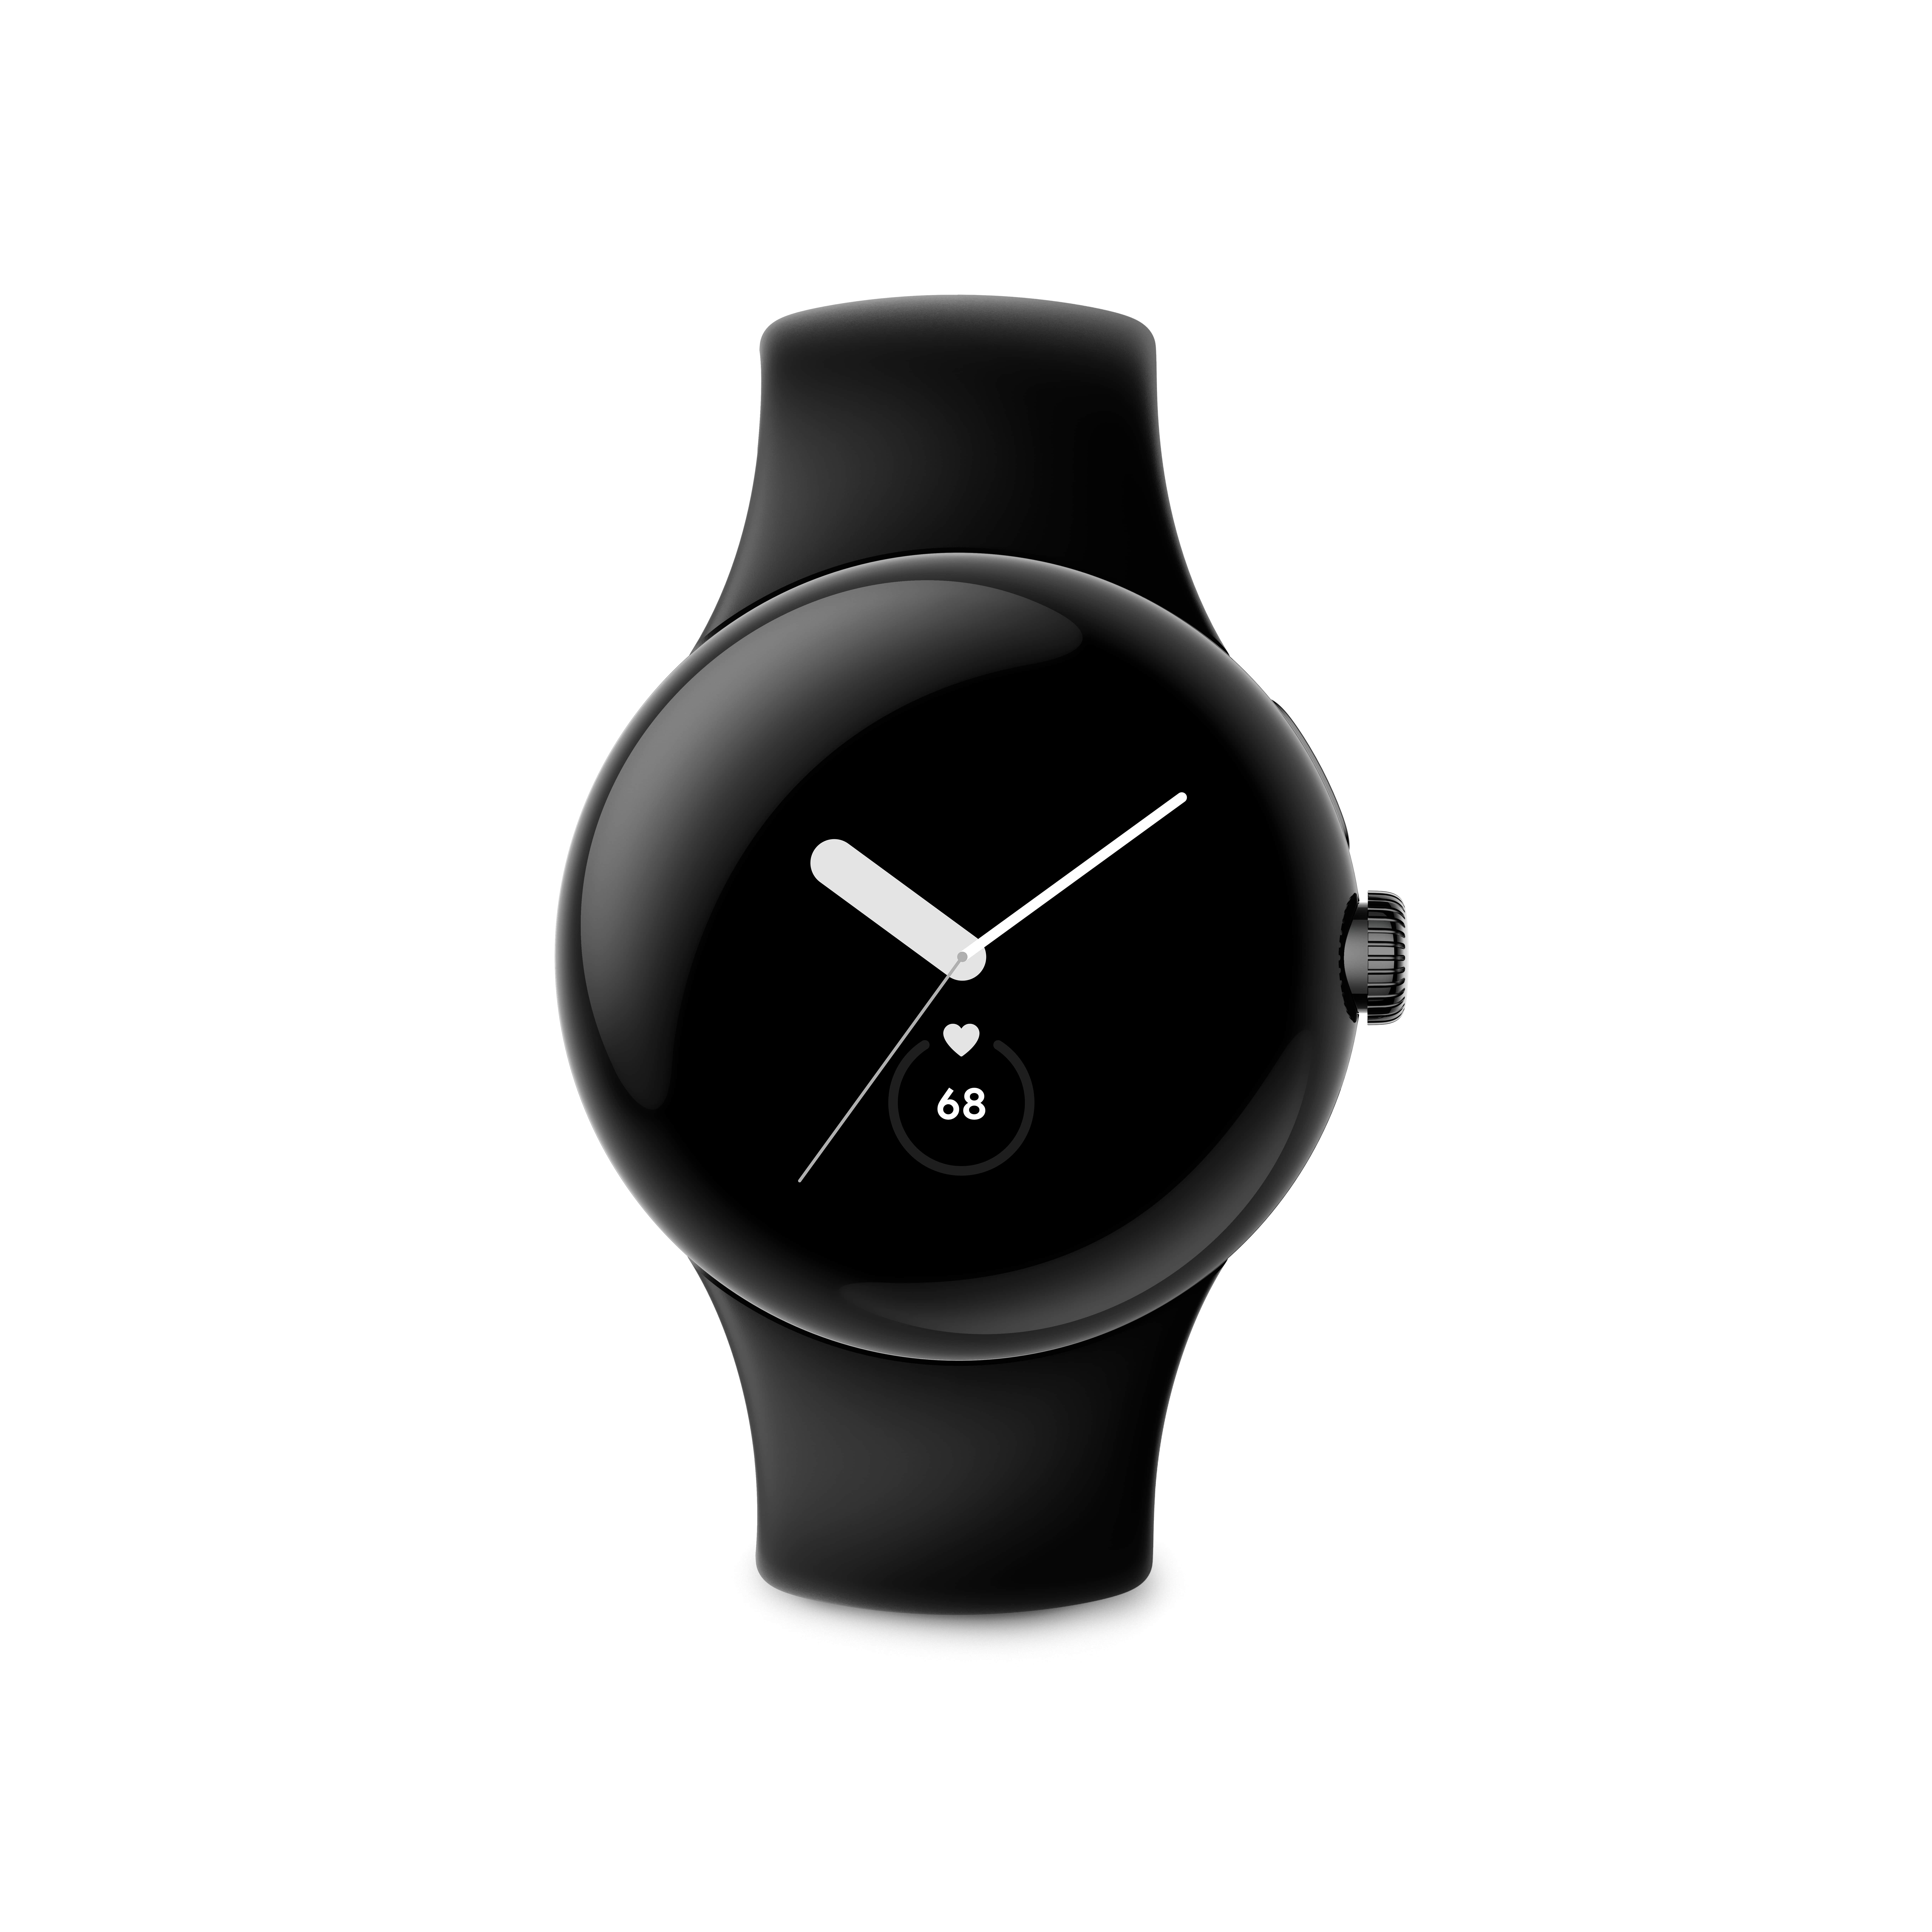 Google releases its first smartwatch